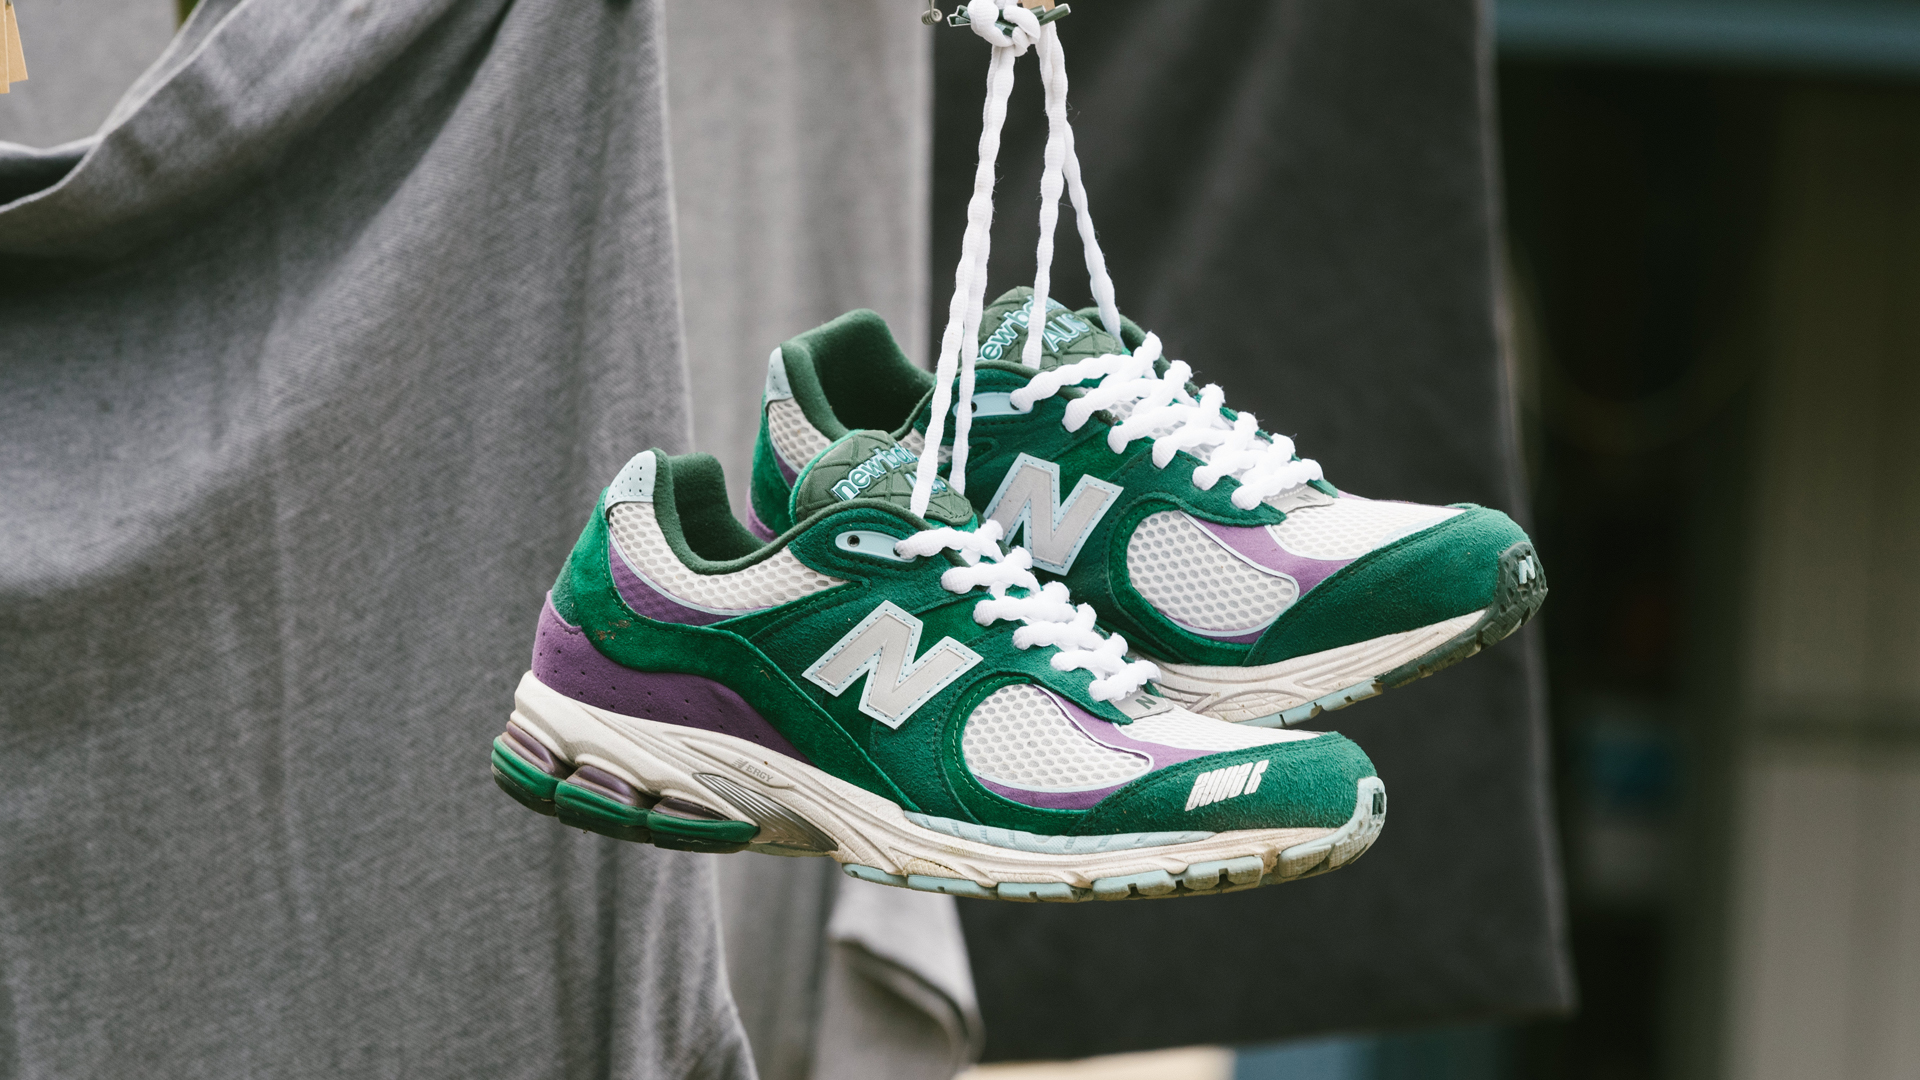 New Balance's 2002R sneaker now has pockets for all your little treasures